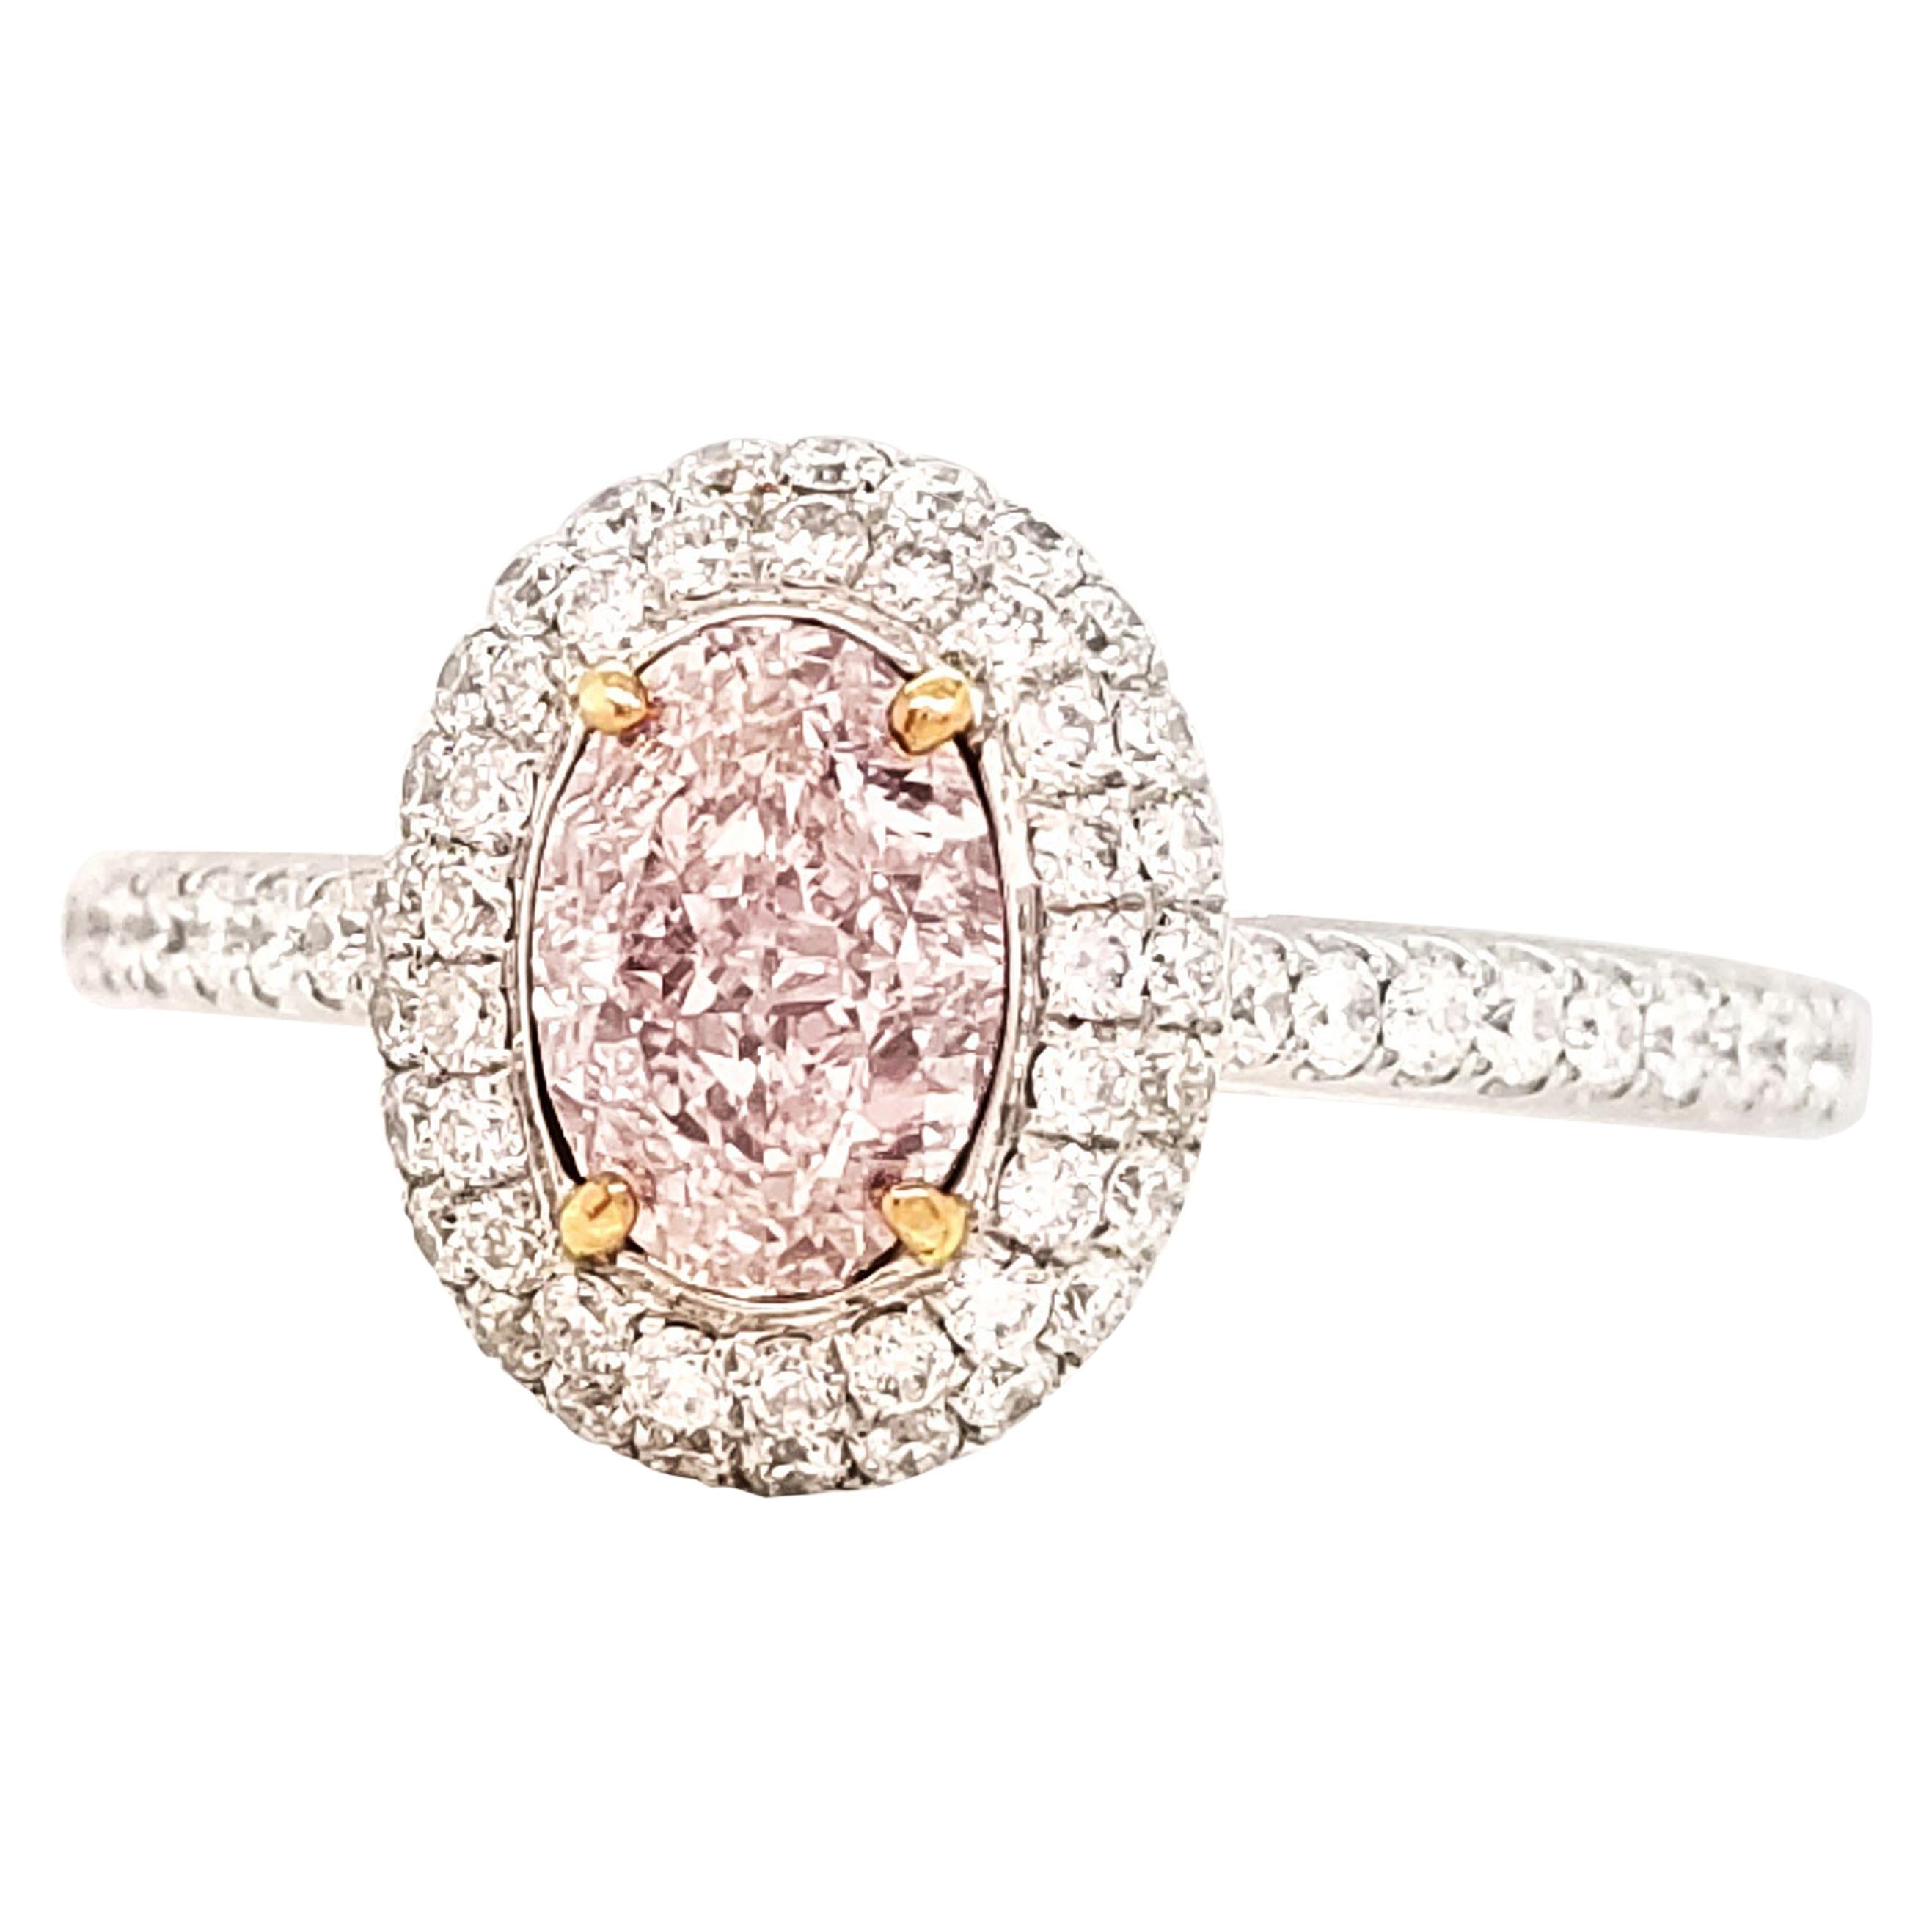 Scarselli GIA Oval Halo 0.82 Pink Diamond Engagement Ring in 18 Karat White Gold For Sale